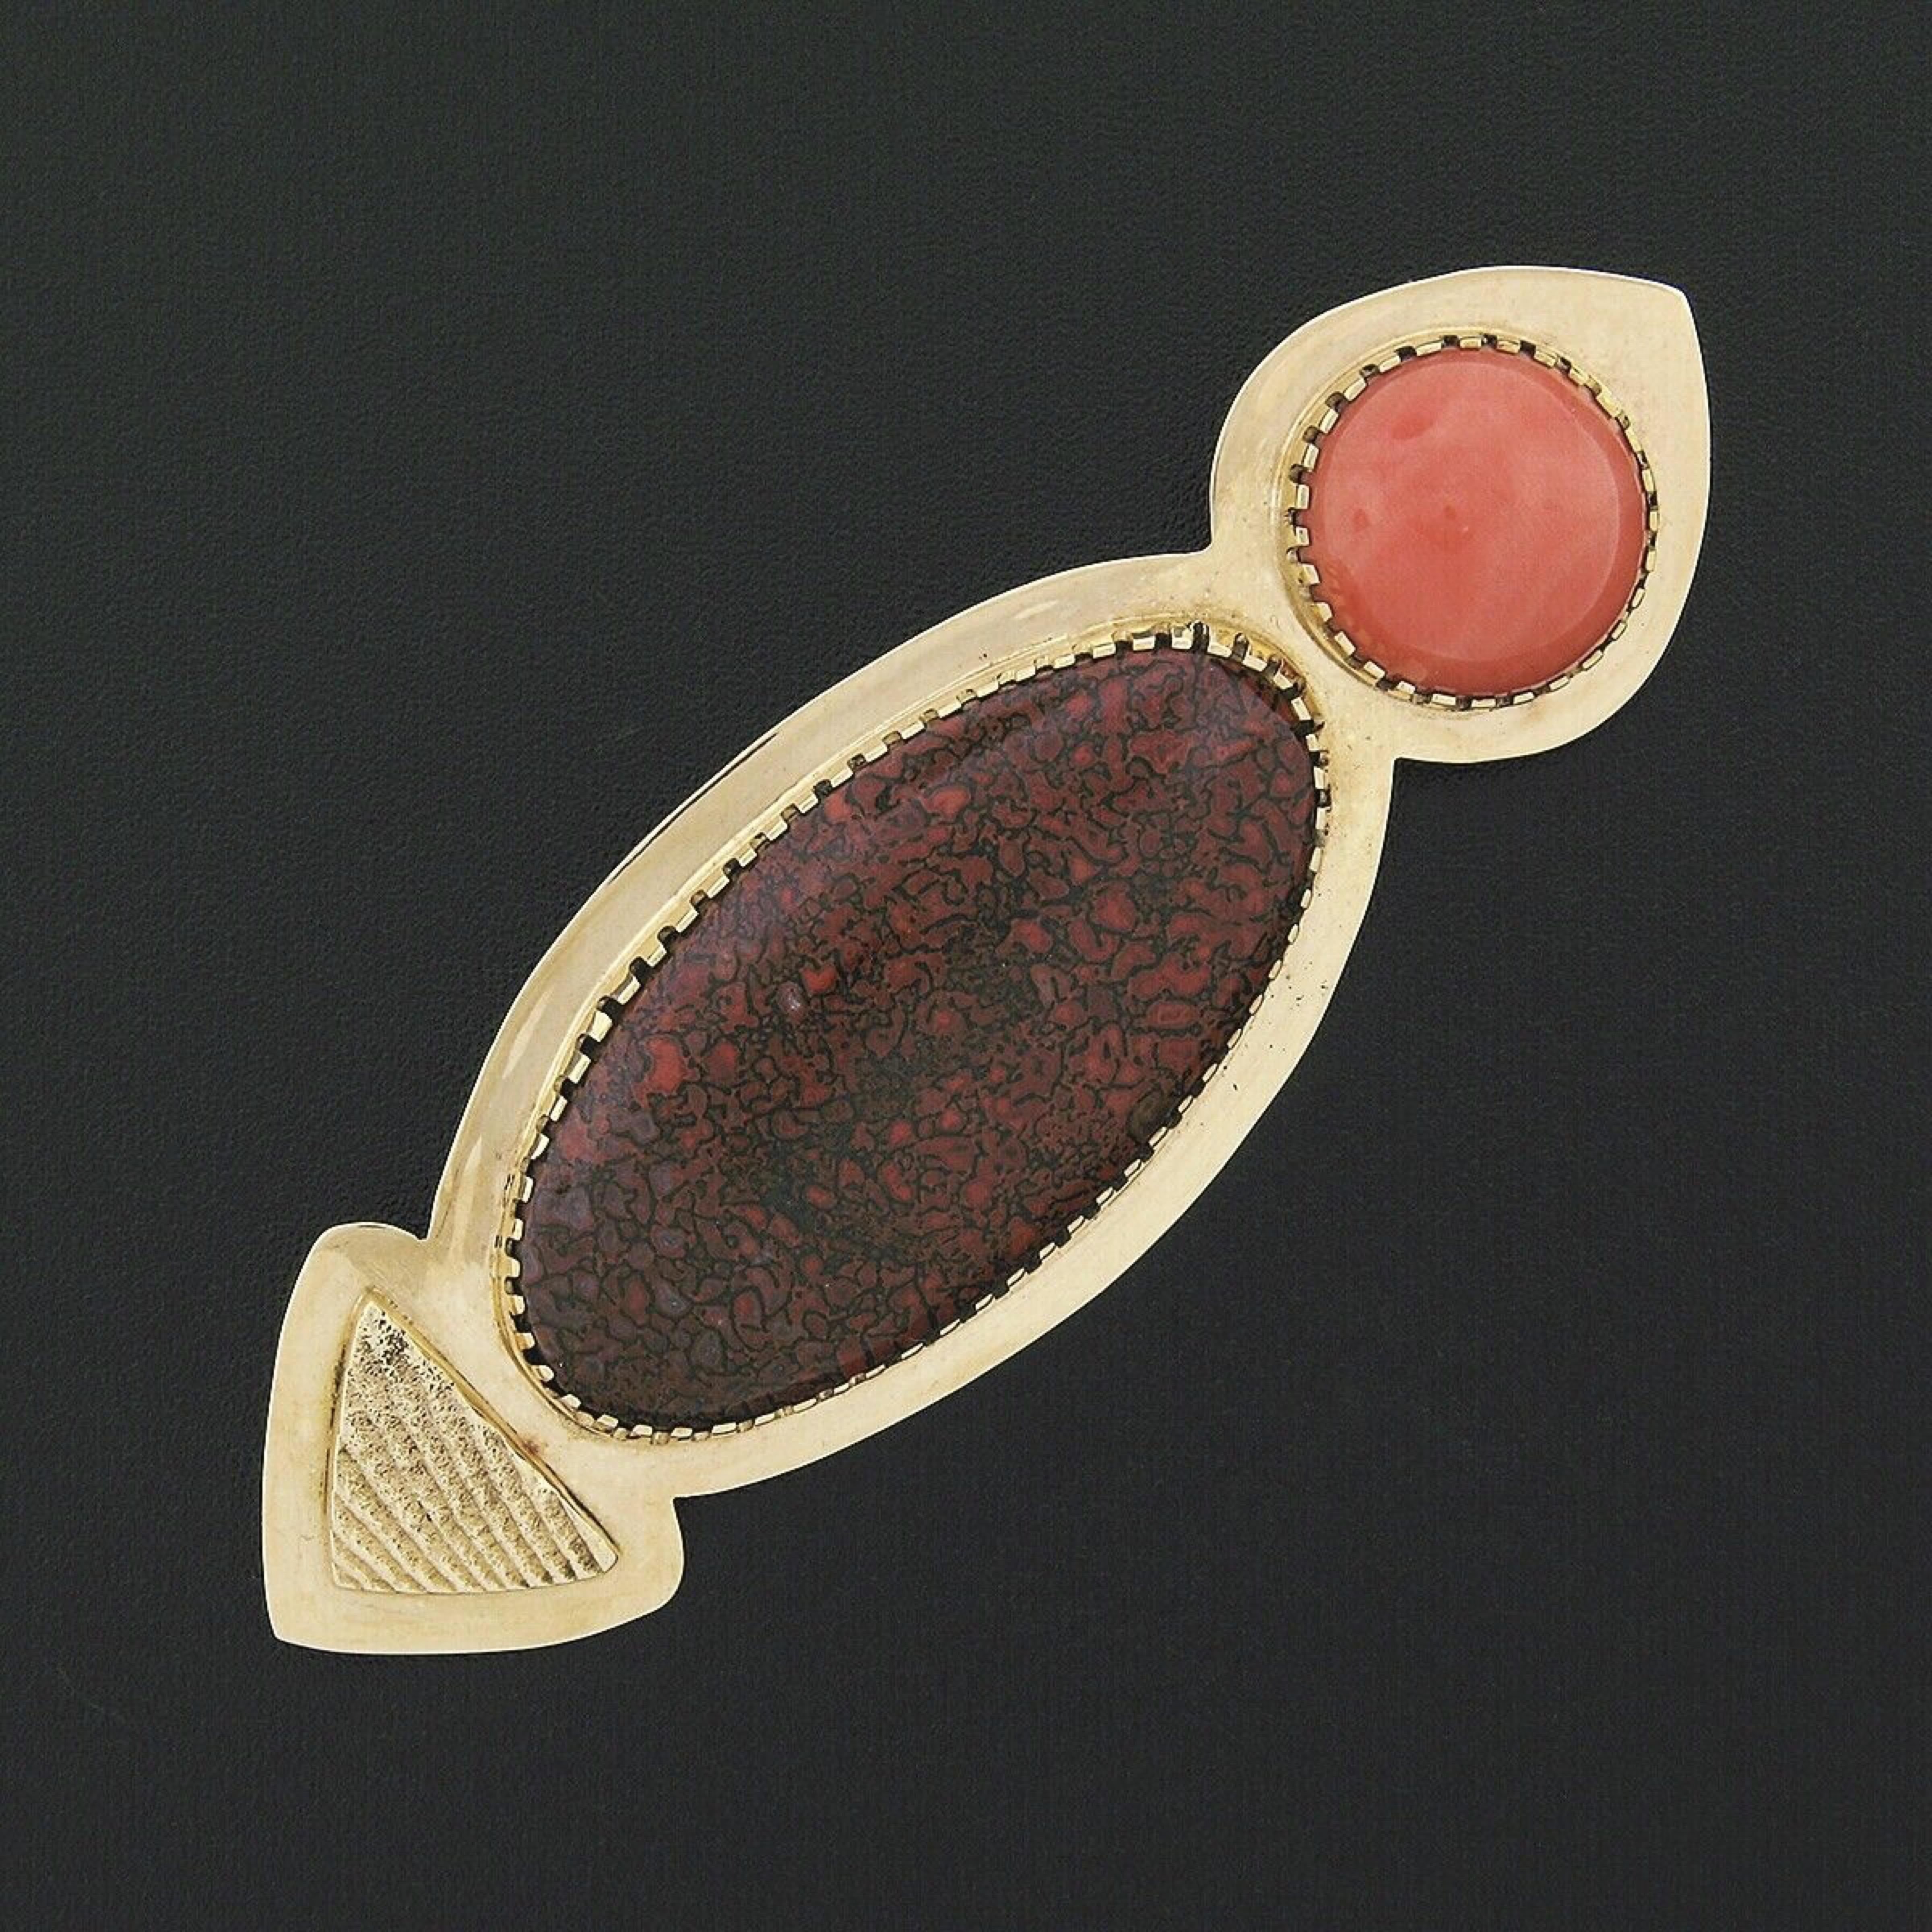 You are looking at a simply marvelous vintage pin brooch crafted from solid 18k yellow gold and features an elegant design of a multi-prong set oval agate at the center with a round coral at its side. The unique agate shows an attractive red and